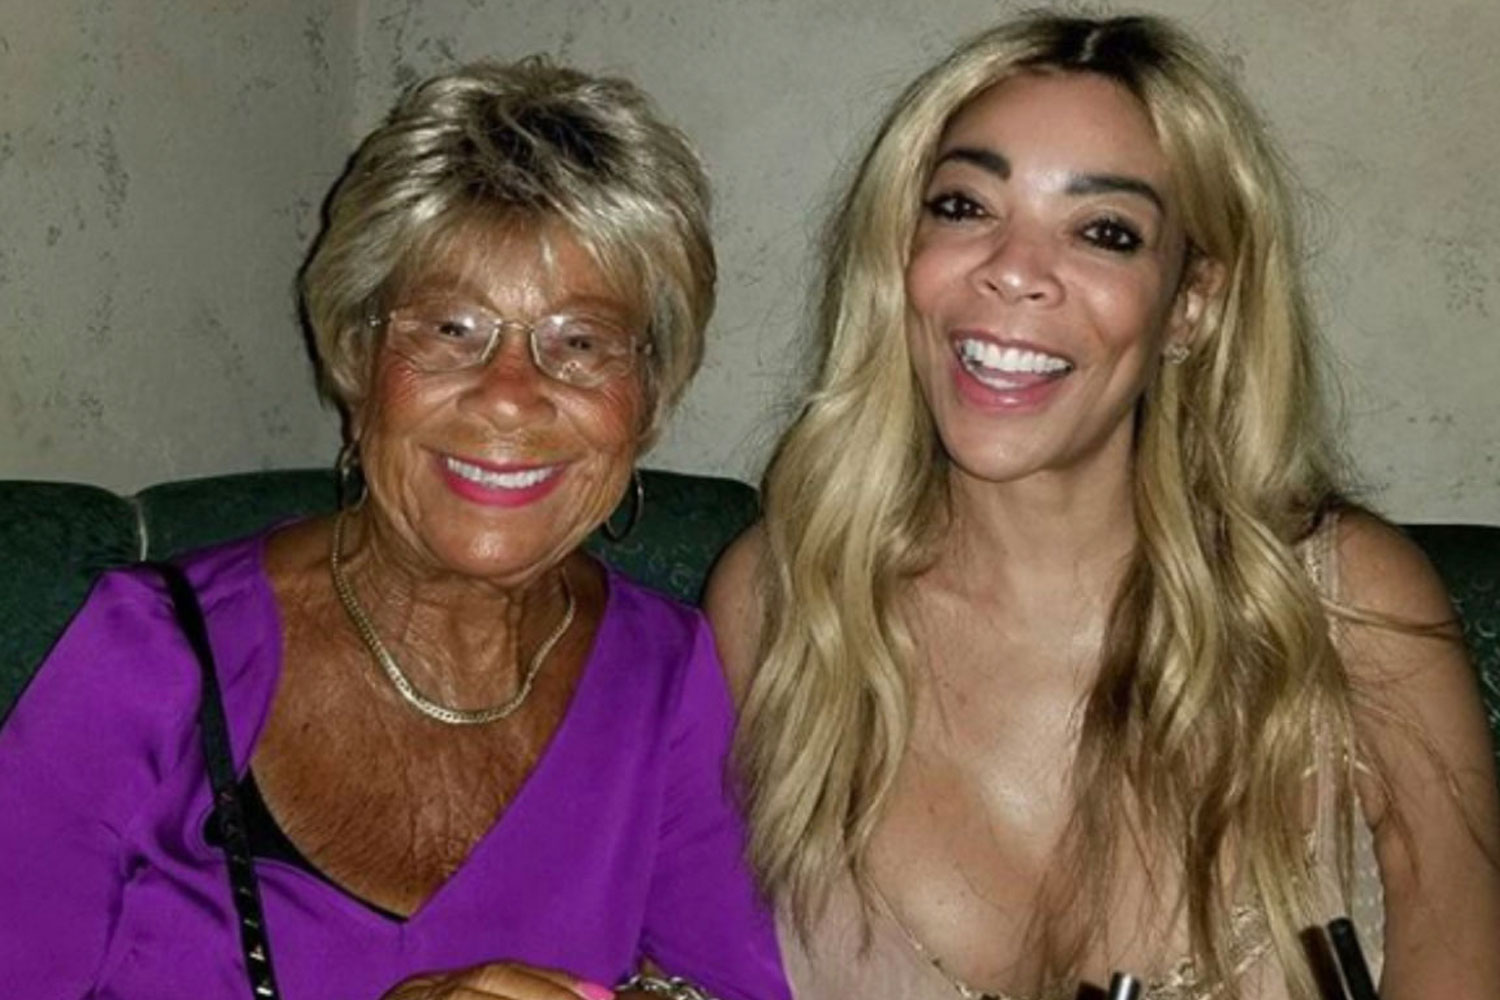 Wendy Williams recently revealed that her mother passed away 'weeks and weeks ago' in December